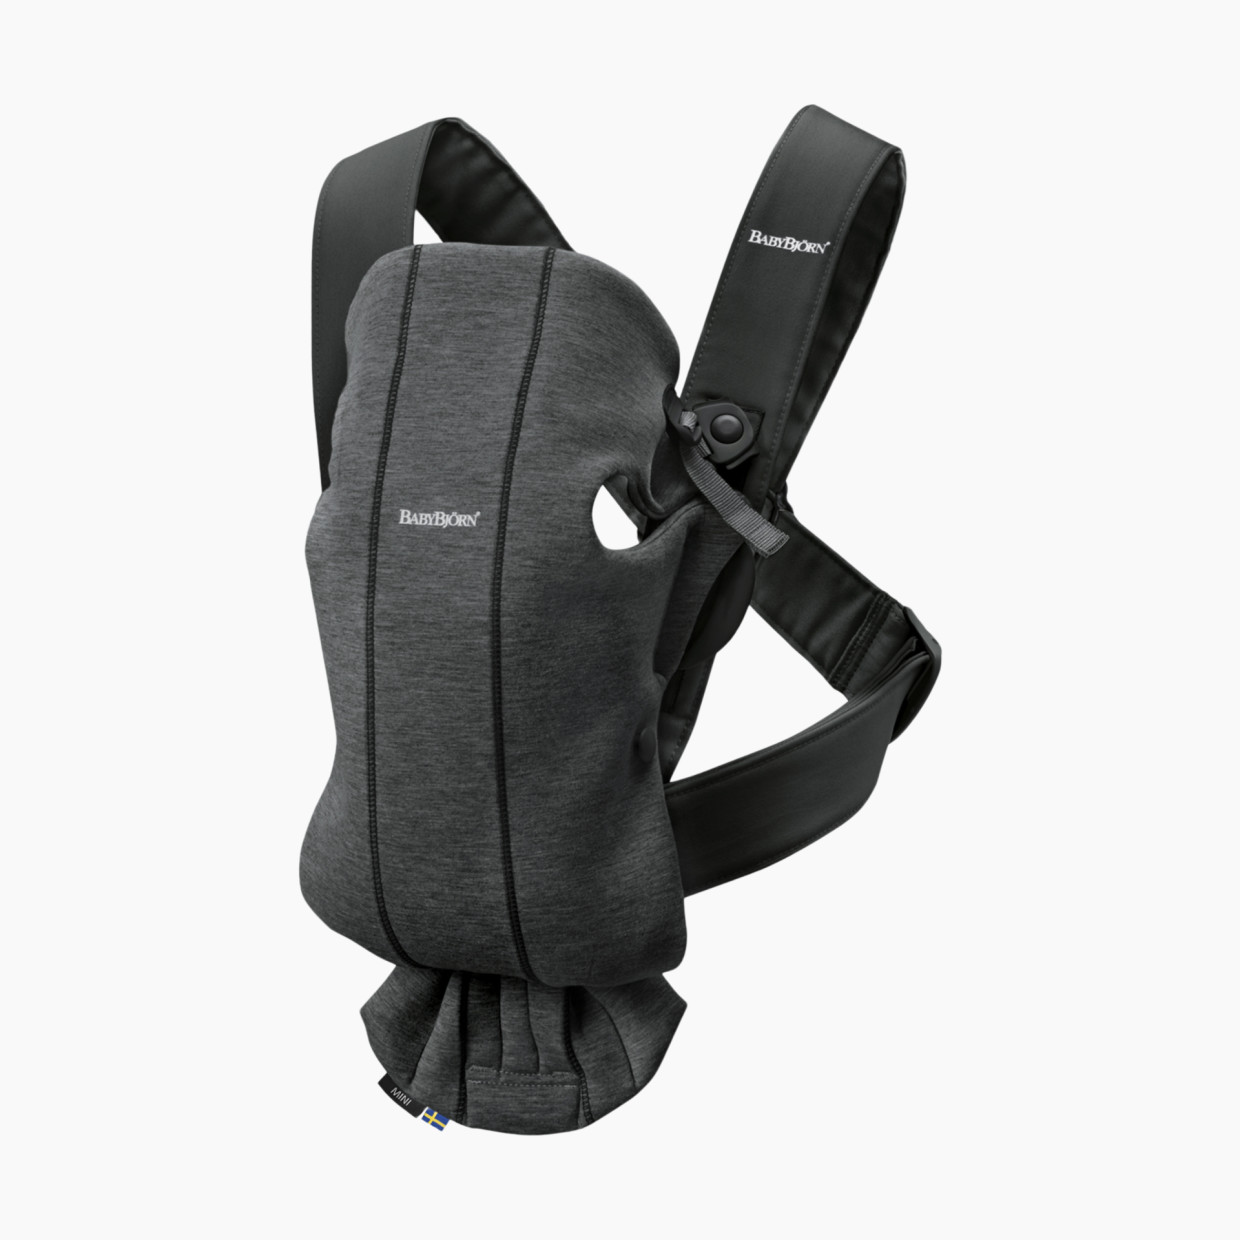 Baby Bjorn Baby Carrier Mini - Charcoal 3 D Jersey.